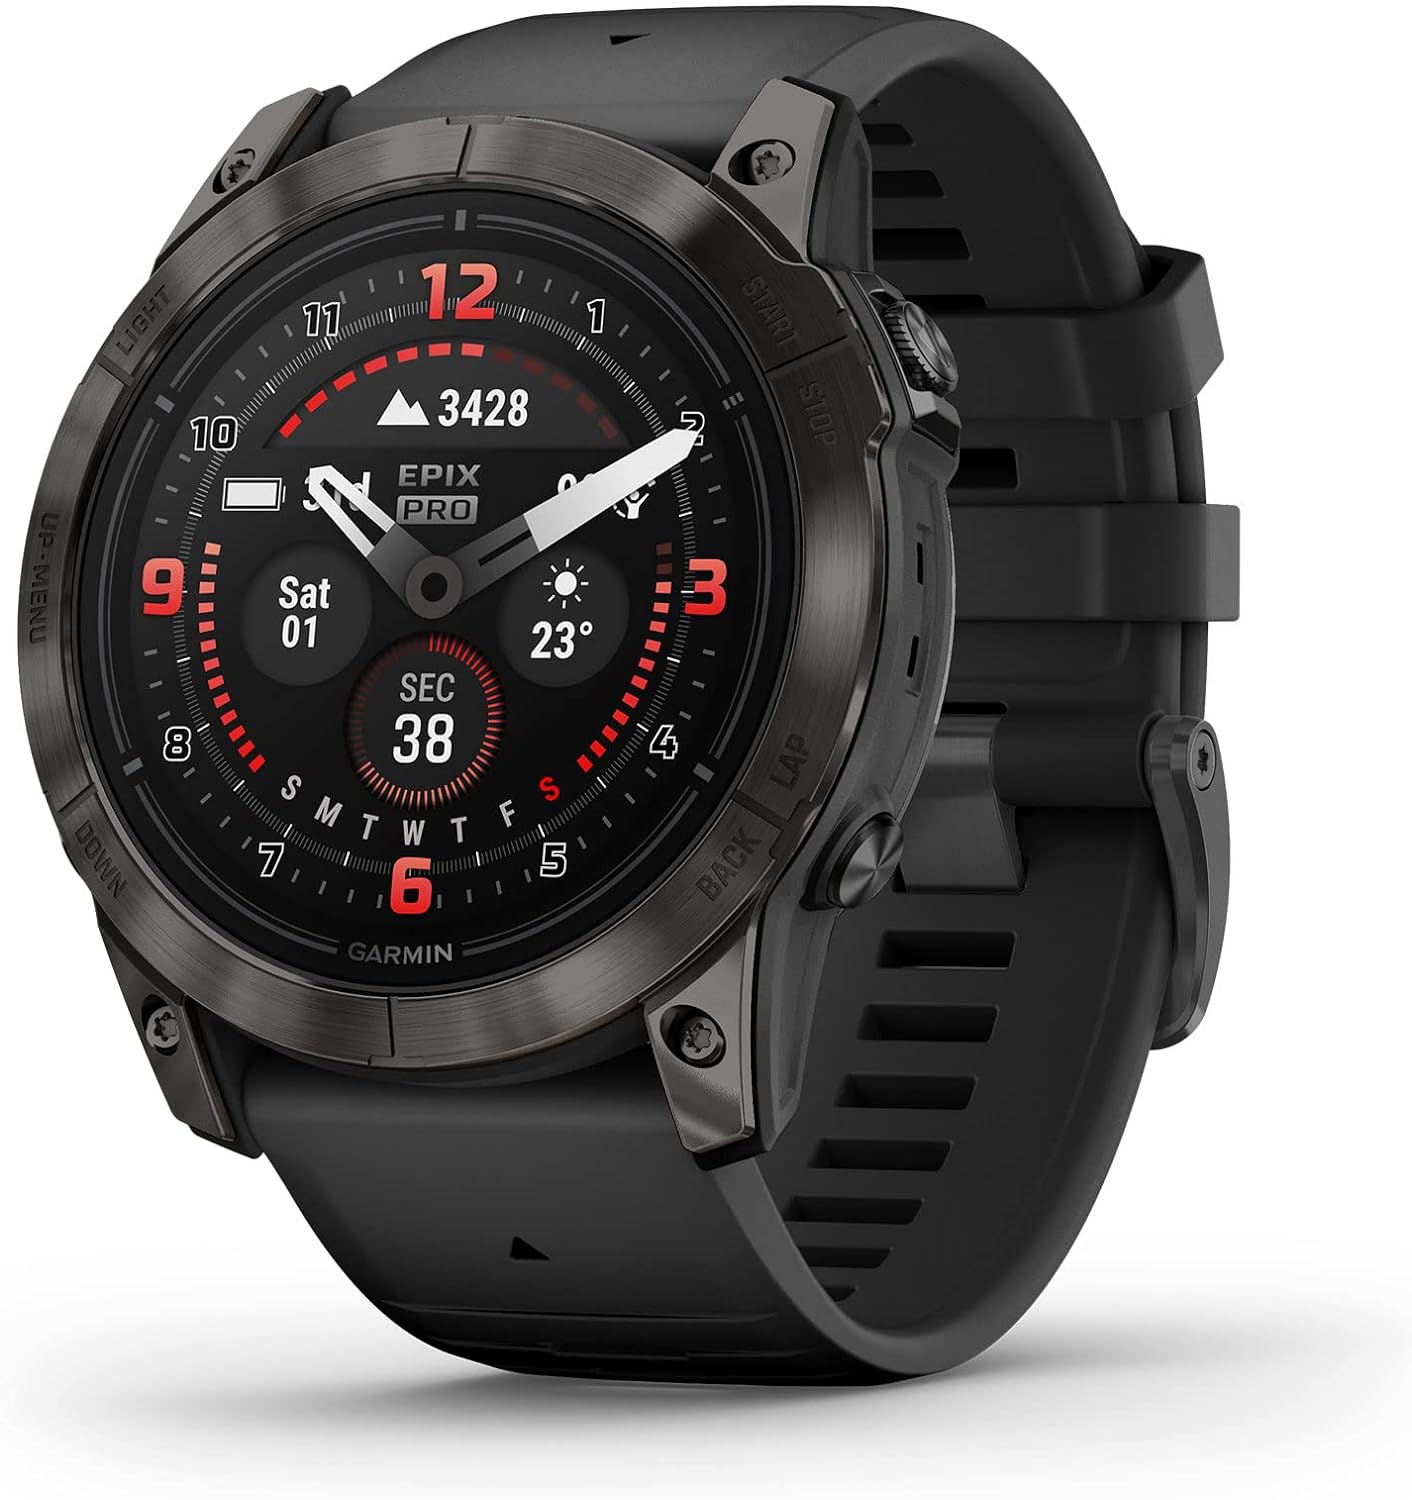 Guide to Buying a Sports Watch: Tips and Considerations